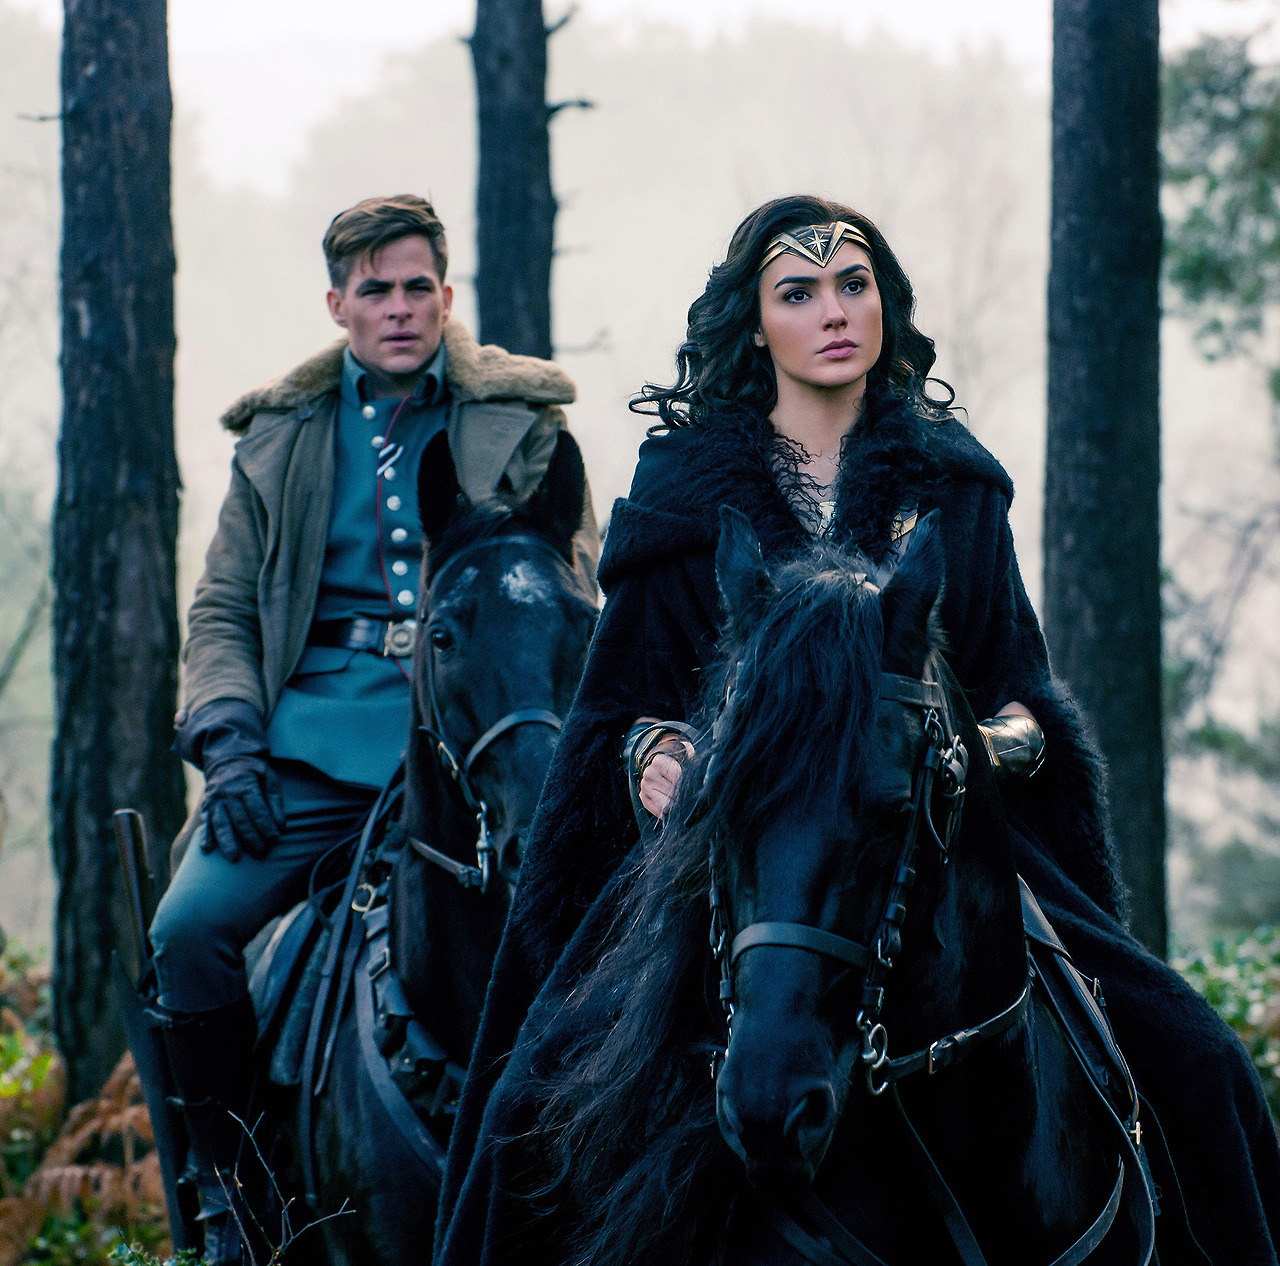 SPOILER ALERT: These two are just … *sigh*. I saw WW for the 2nd (but not last) time yesterday, and found that it impacted me even more deeply. Admittedly, my first viewing was all about sensory overload and I didn’t fully process everything that...